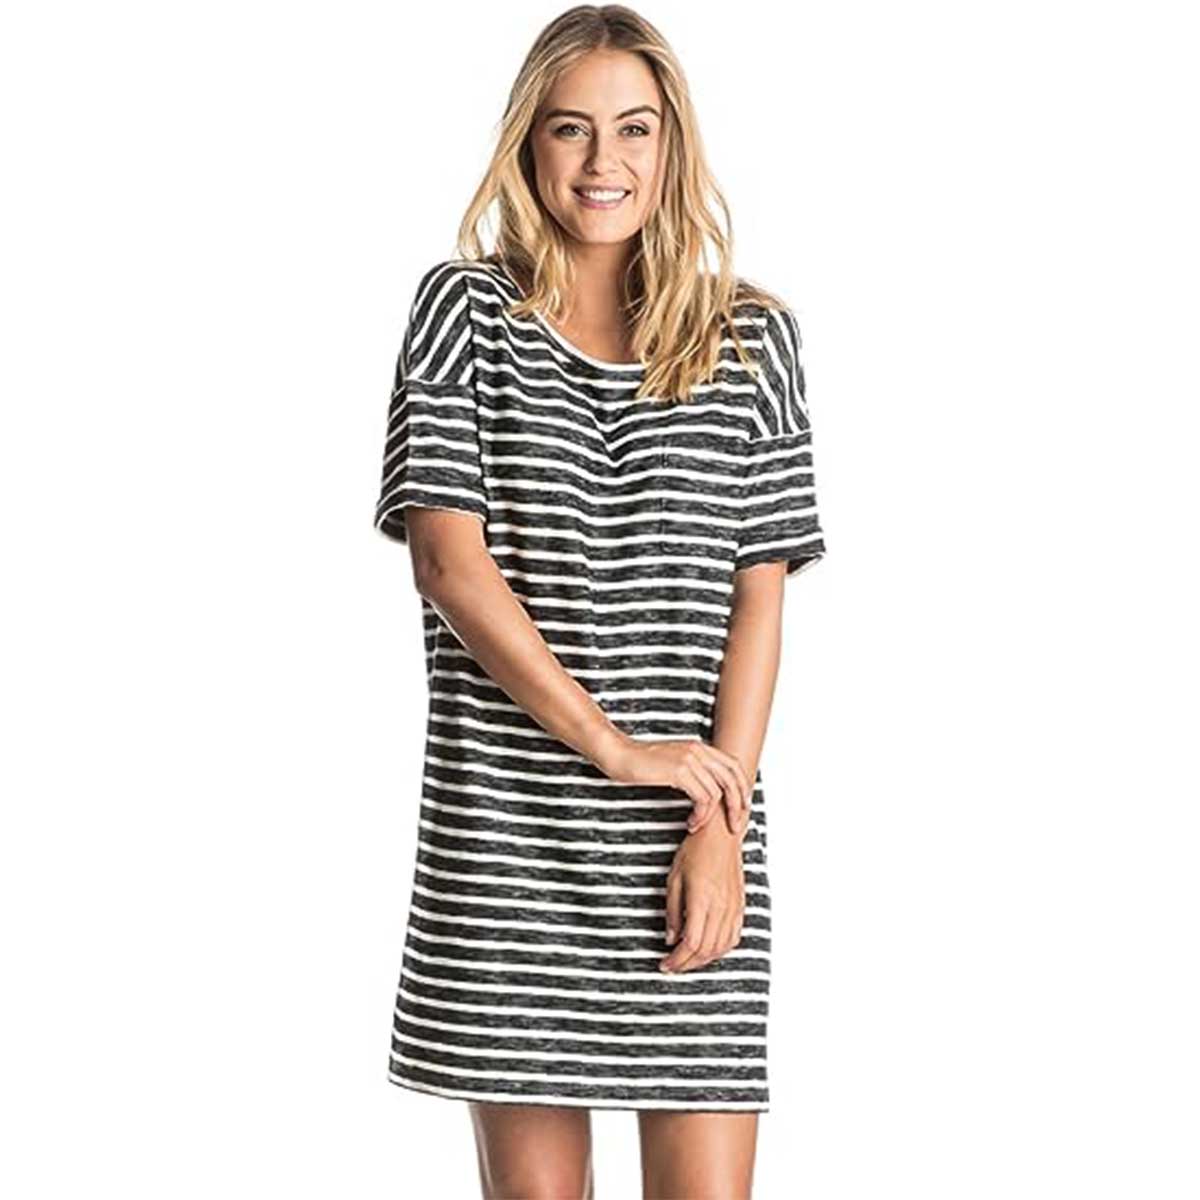 Roxy Get Together Women's Dresses (Brand New)